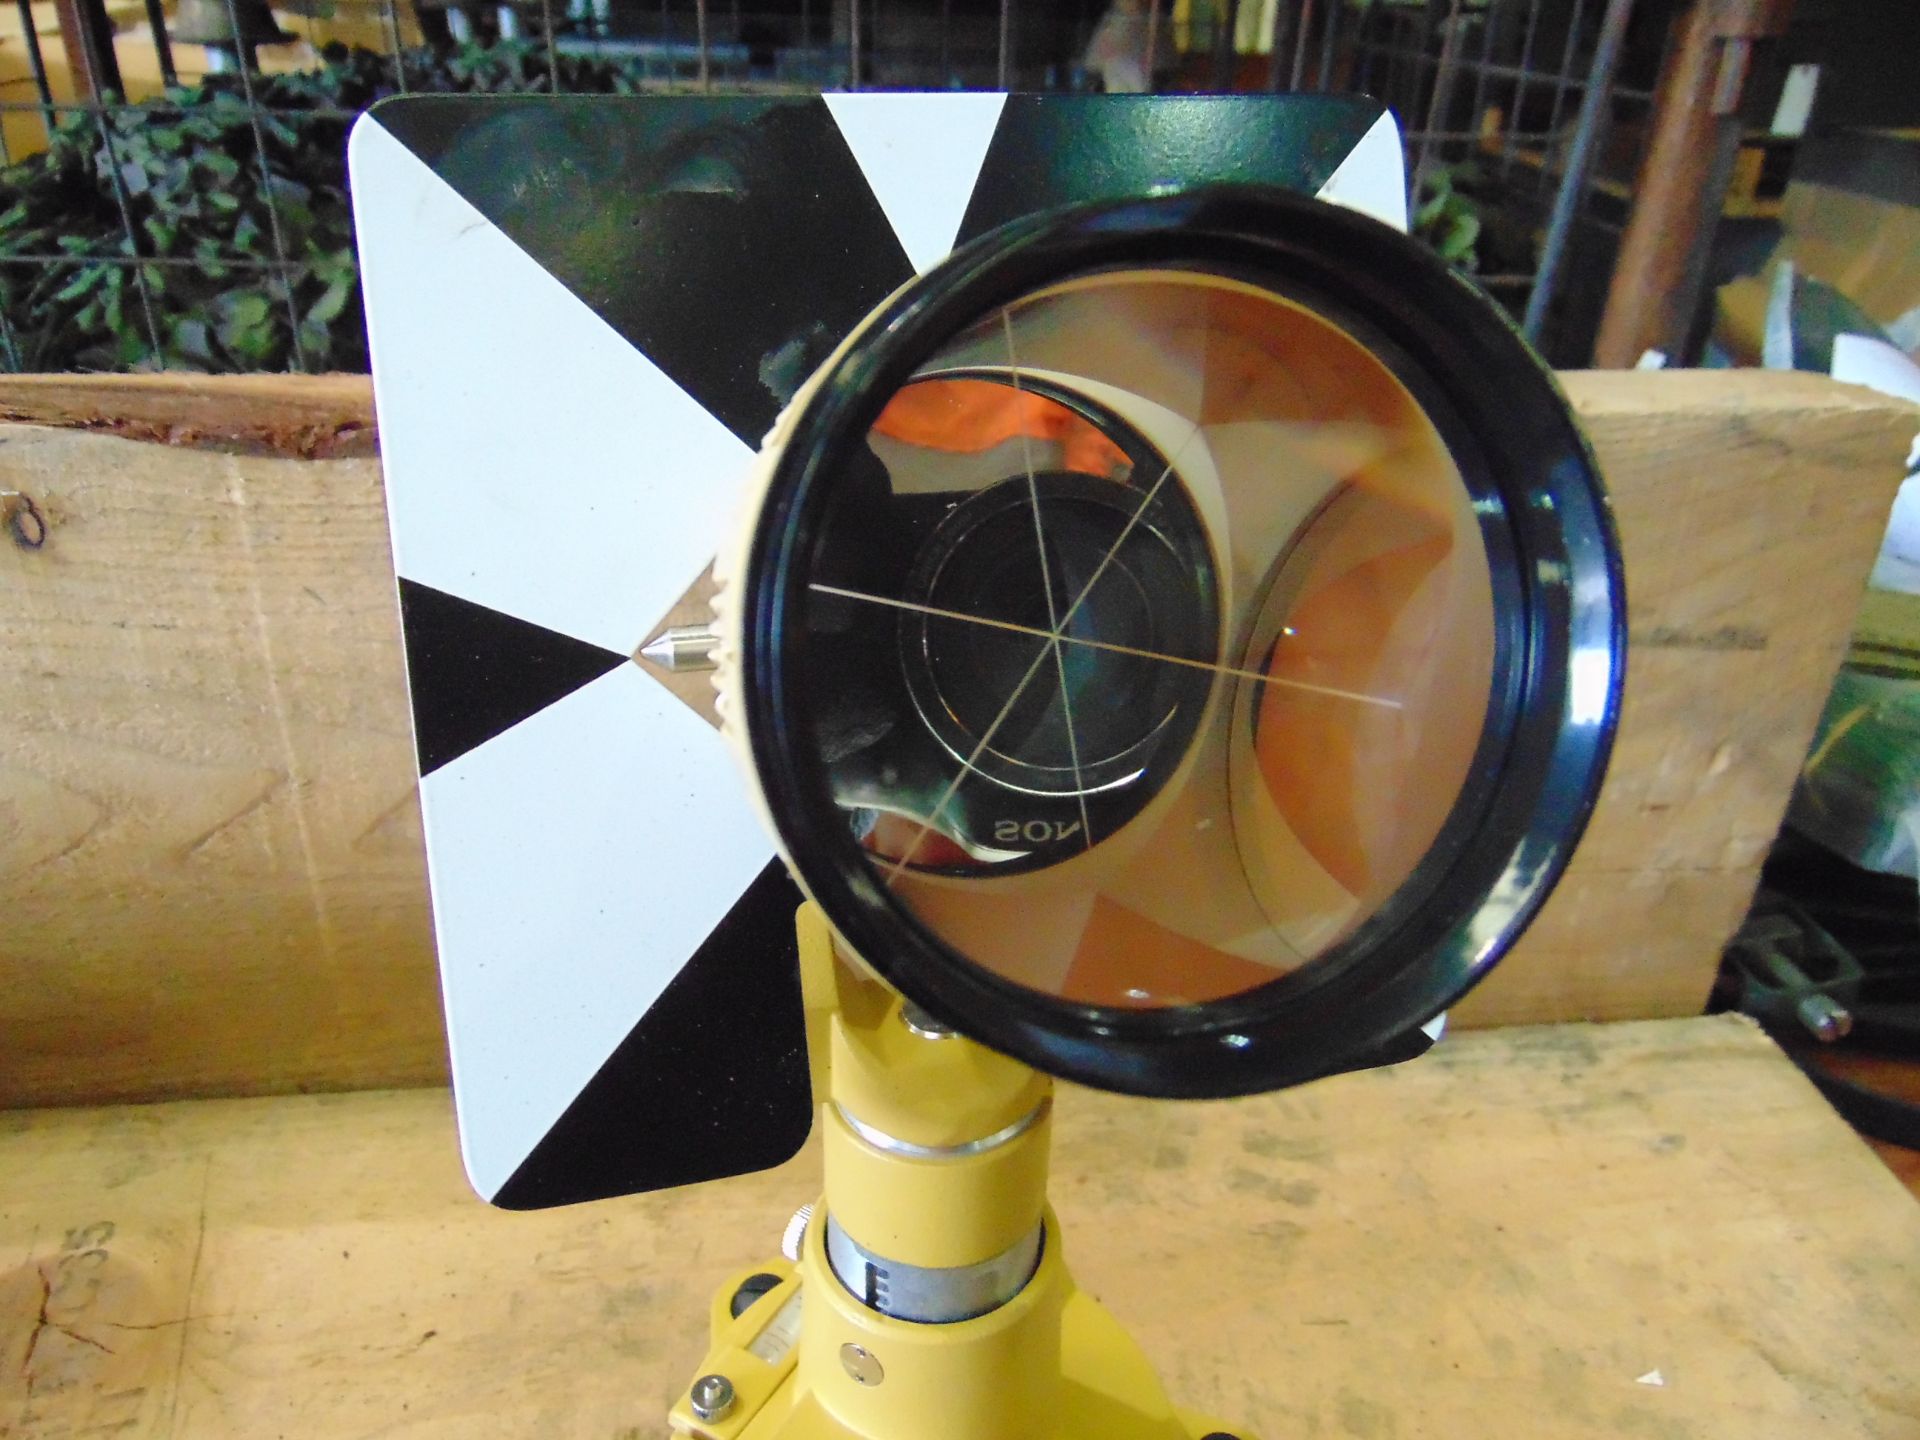 Surveyors Theodolite reflector equipment c/w Transit Case as shown - Image 3 of 8